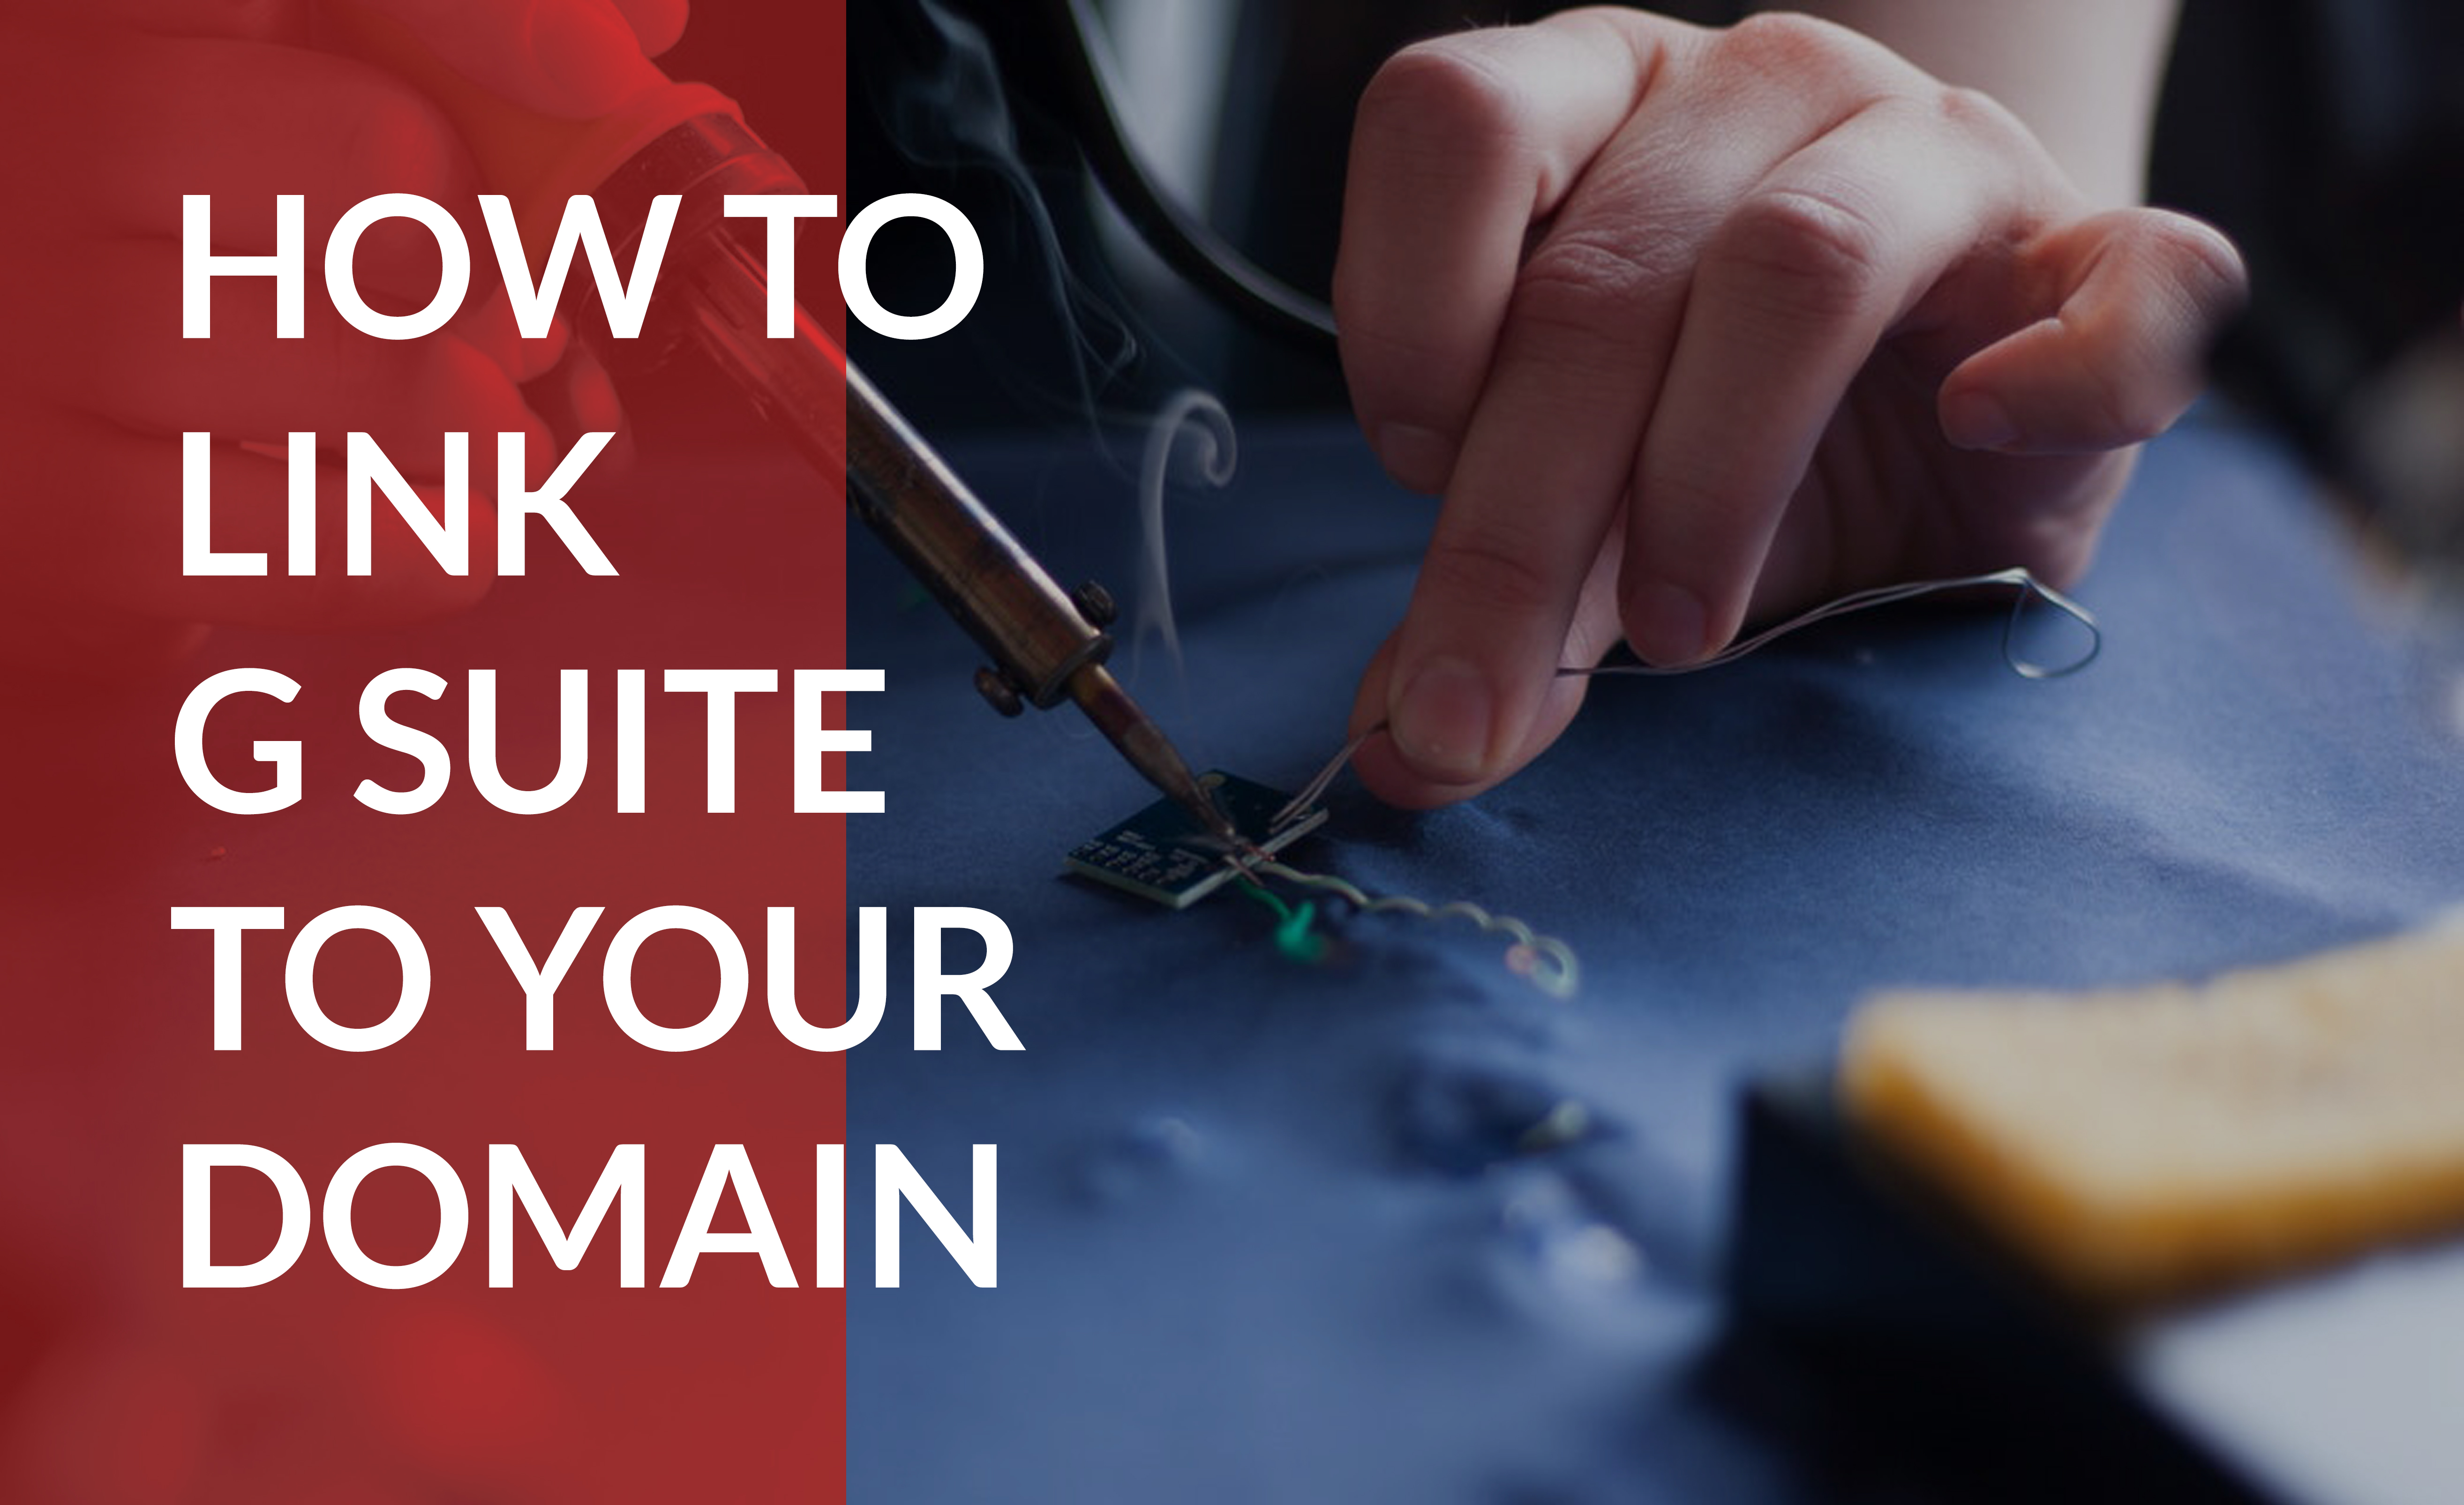 Find out how to link your Gmail account to your custom domain name.